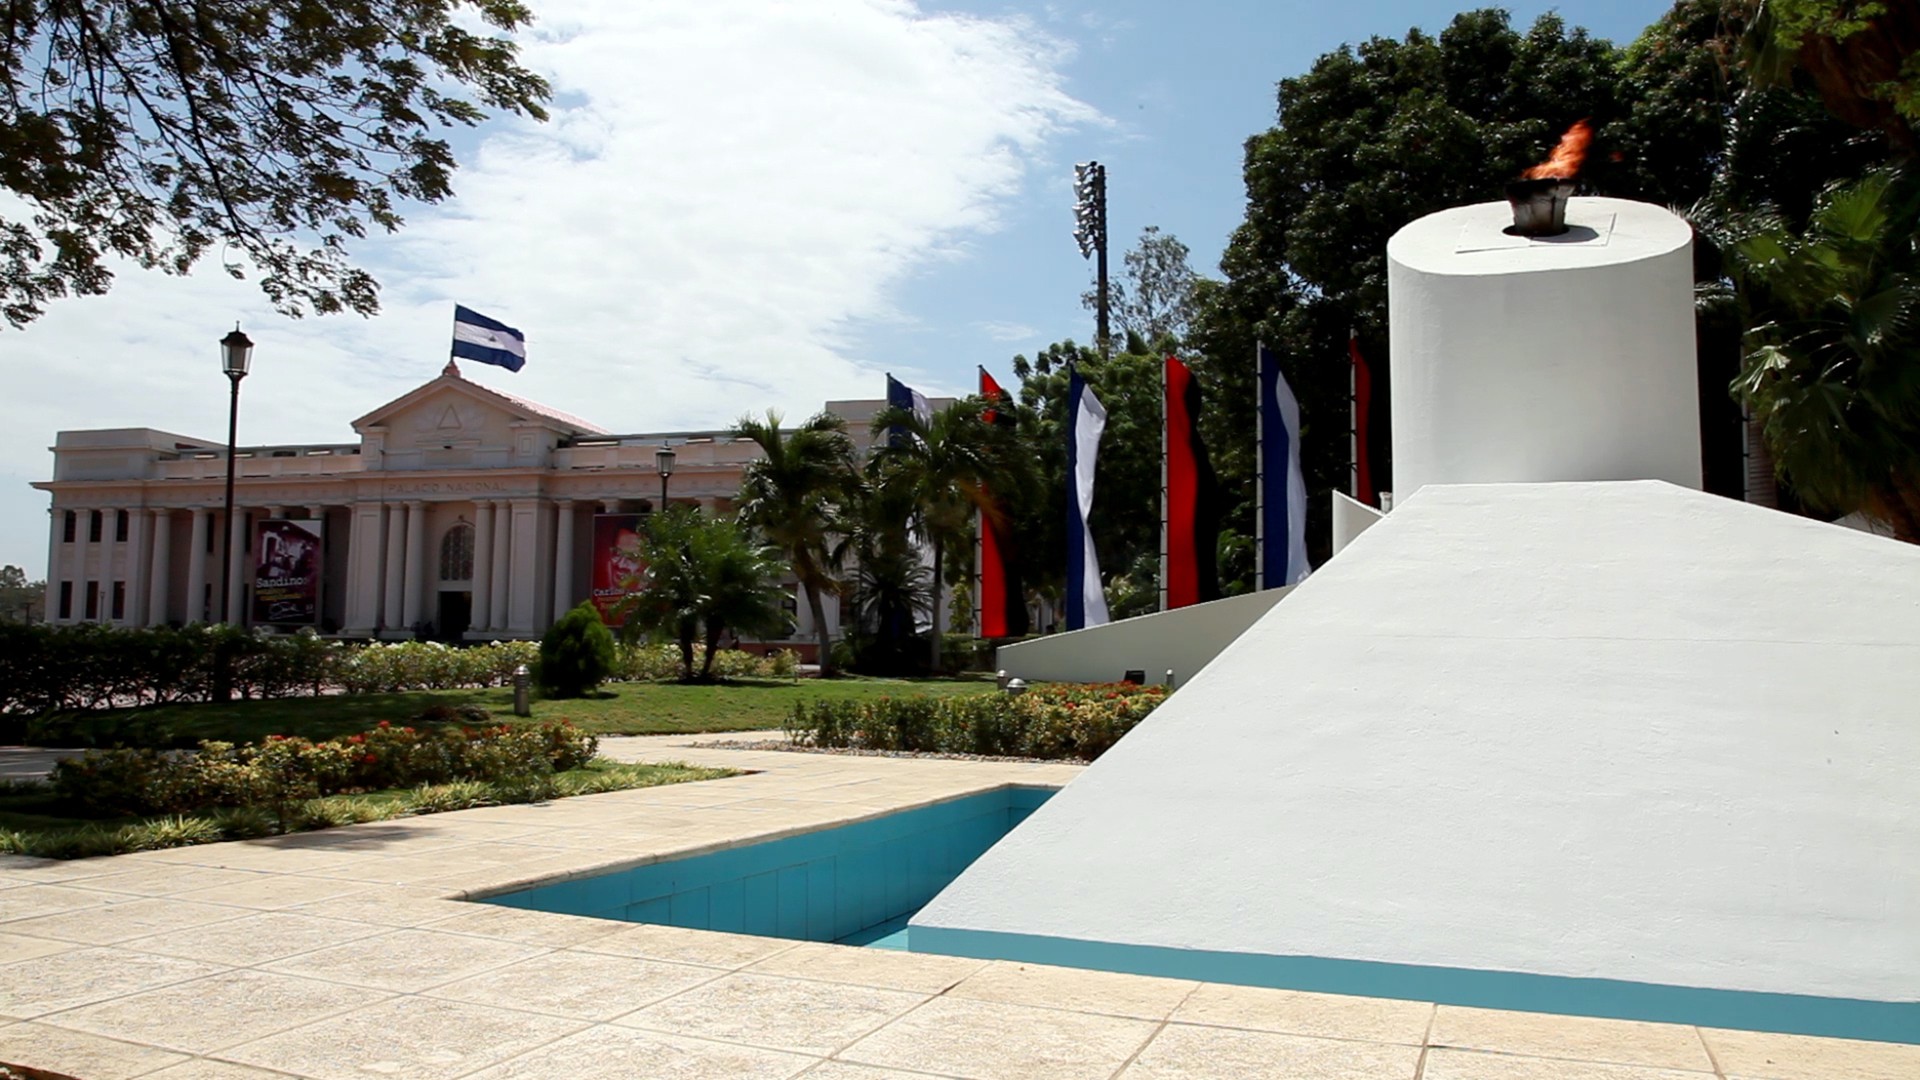 The National Palace of Culture in Managua, Nicaragua, houses the National Museum, which holds a variety of exhibitions from prehistoric bones and pottery to modern art. (Photo by Theresa Poulson)